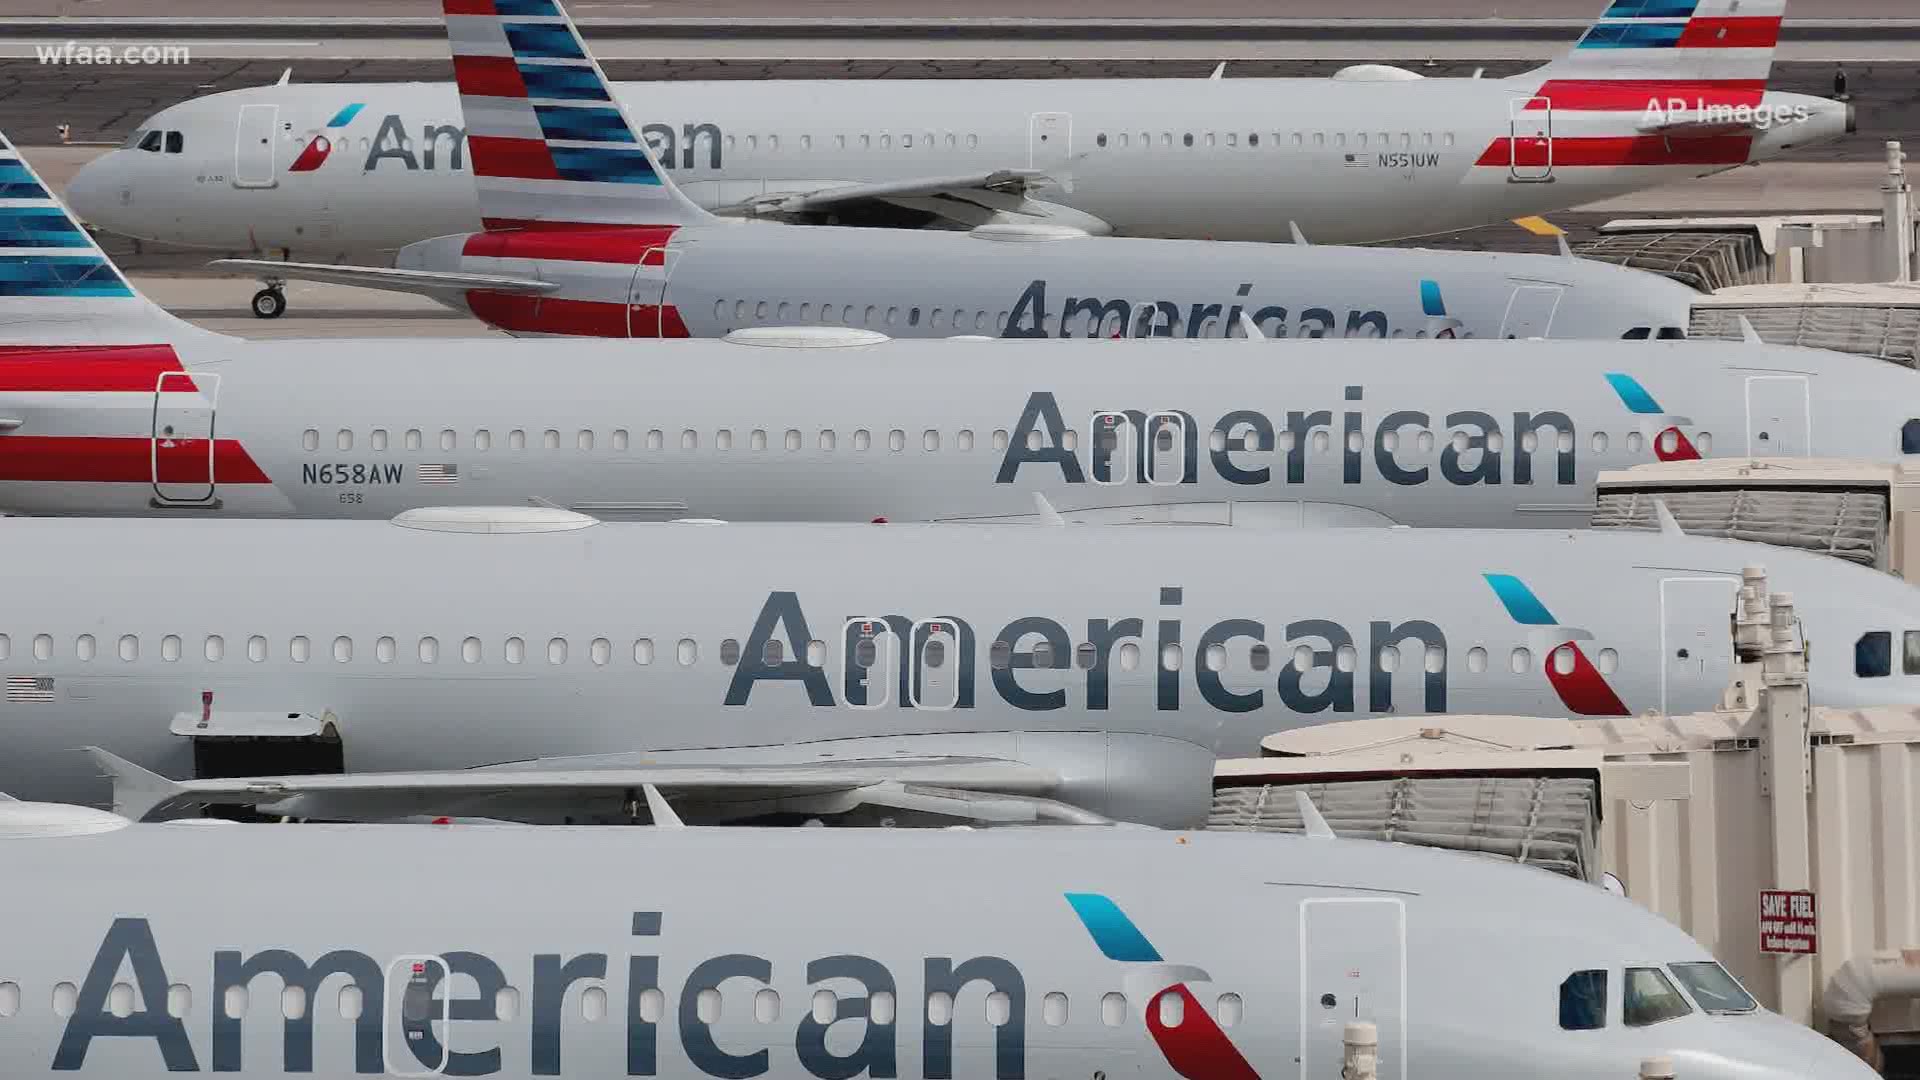 American Airlines says it will furlough or lay off 19,000 employees in October as it struggles with a sharp downturn in travel because of the pandemic.